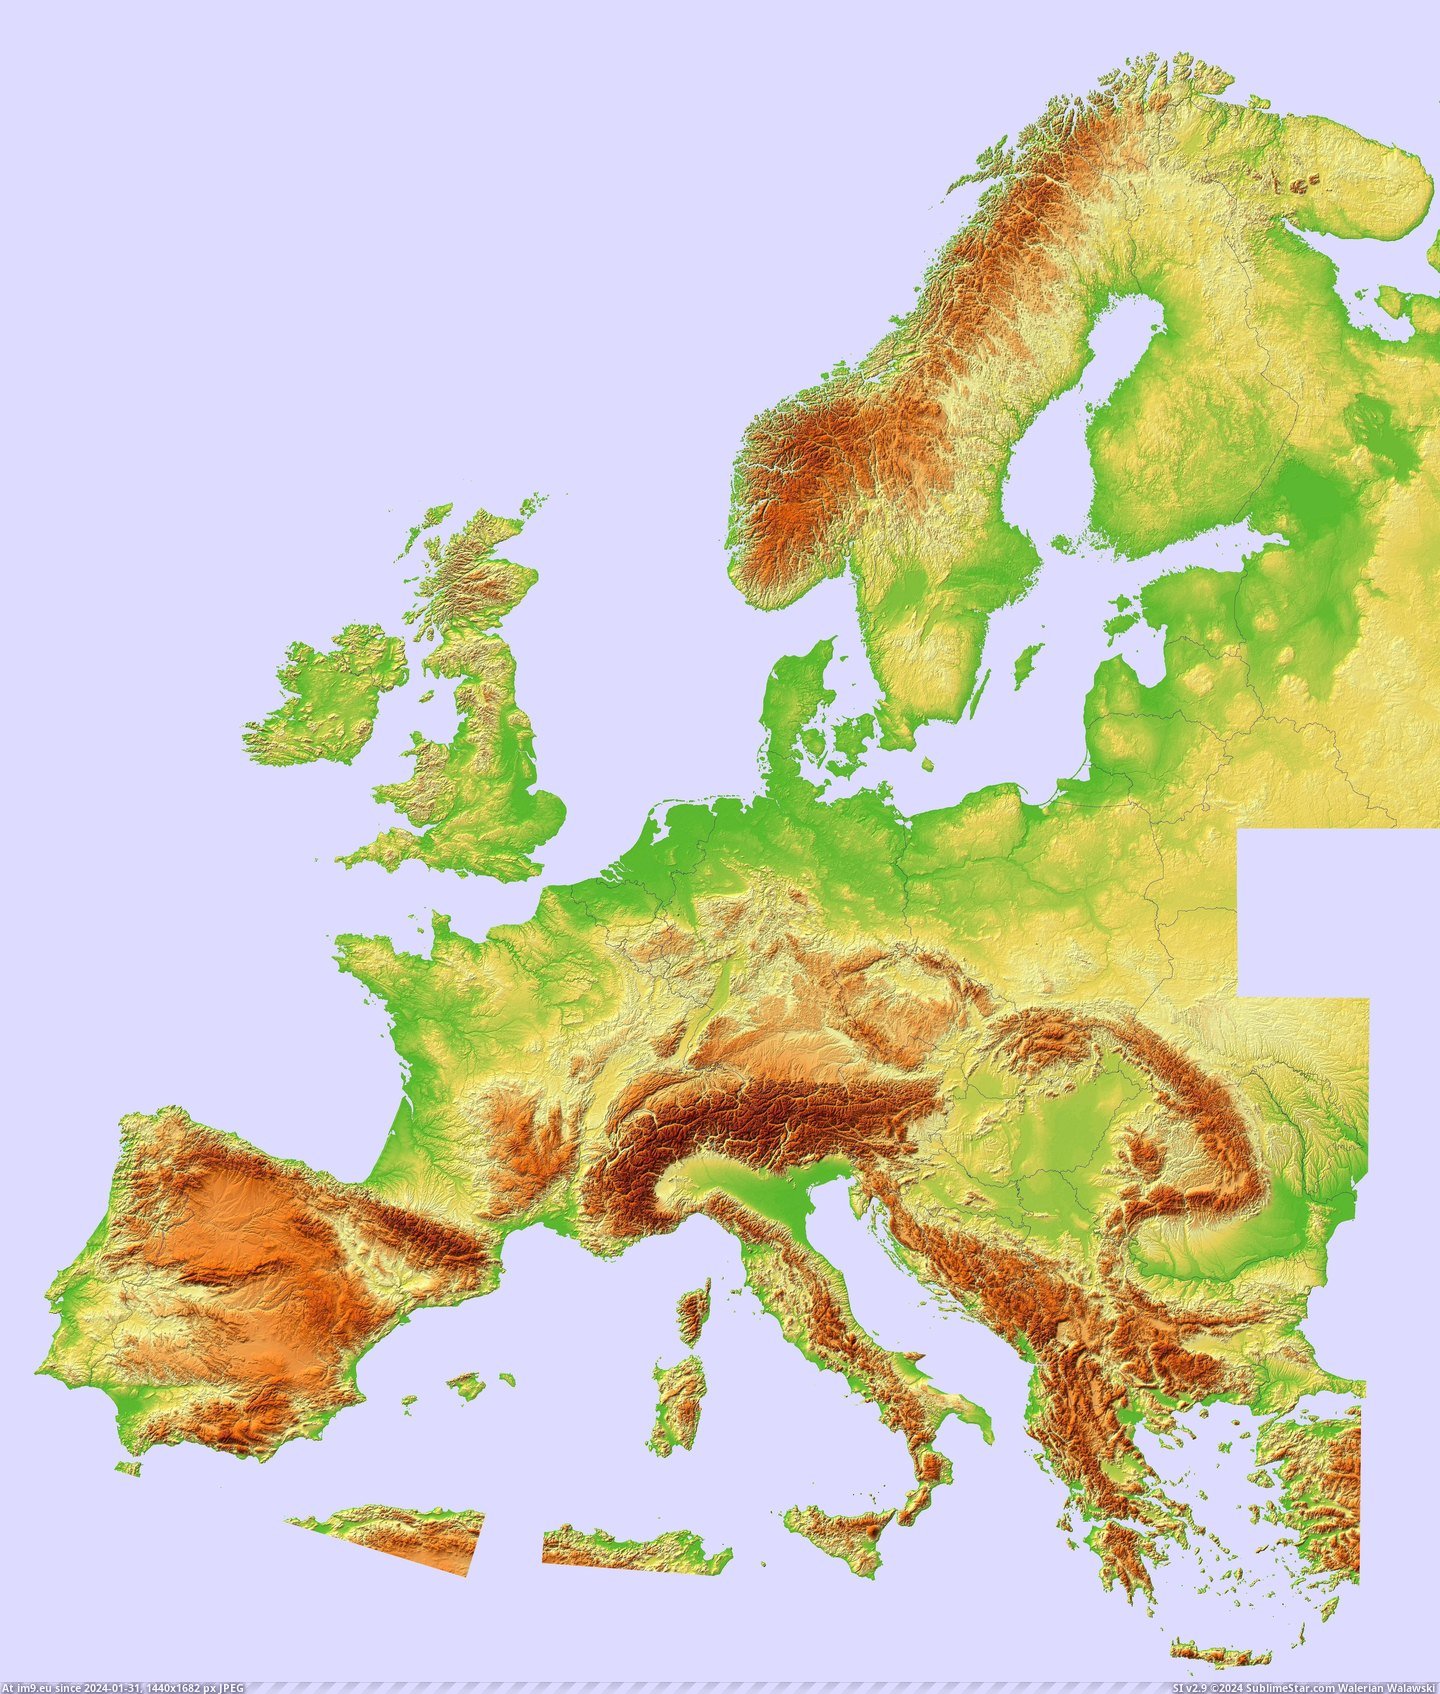 #Map #Topographic #Composite #Europe [Mapporn] Composite Topographic Hillshade Map of Europe - [5754x6731] Pic. (Image of album My r/MAPS favs))